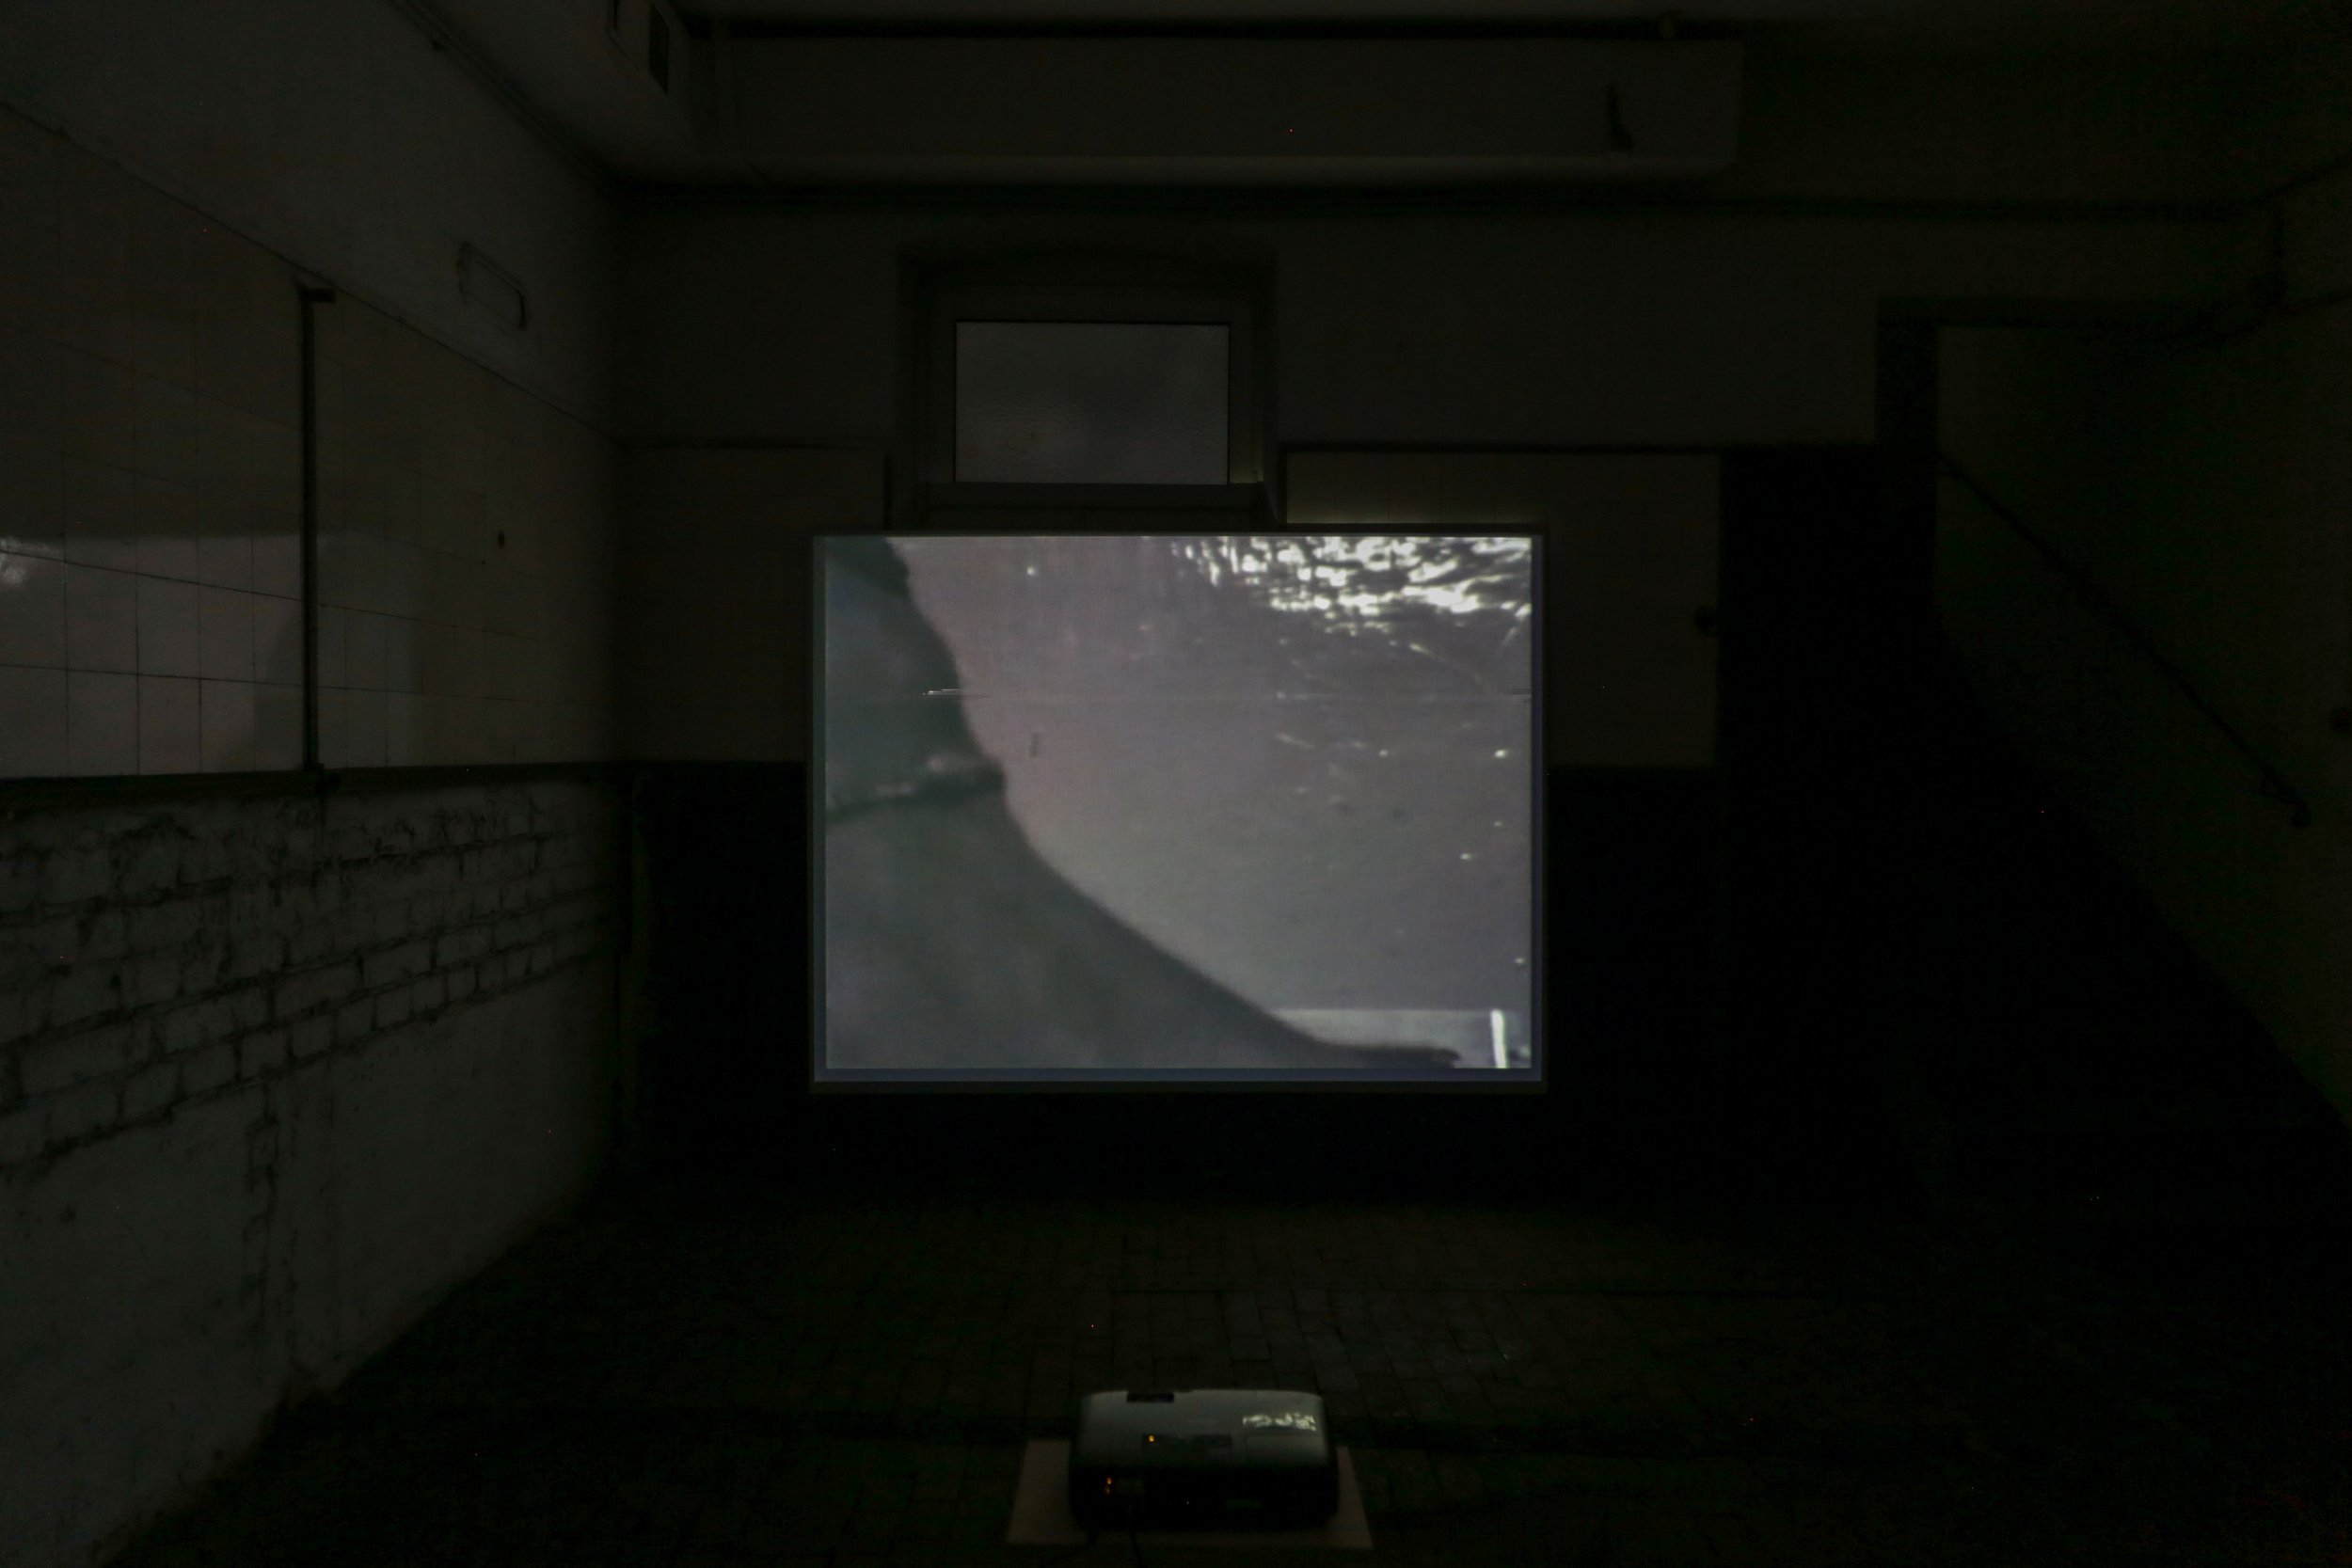   fig22 installation view Joan Jonas, Performance, 1979, 00:11:43., In collections: De Appel, LIMA  